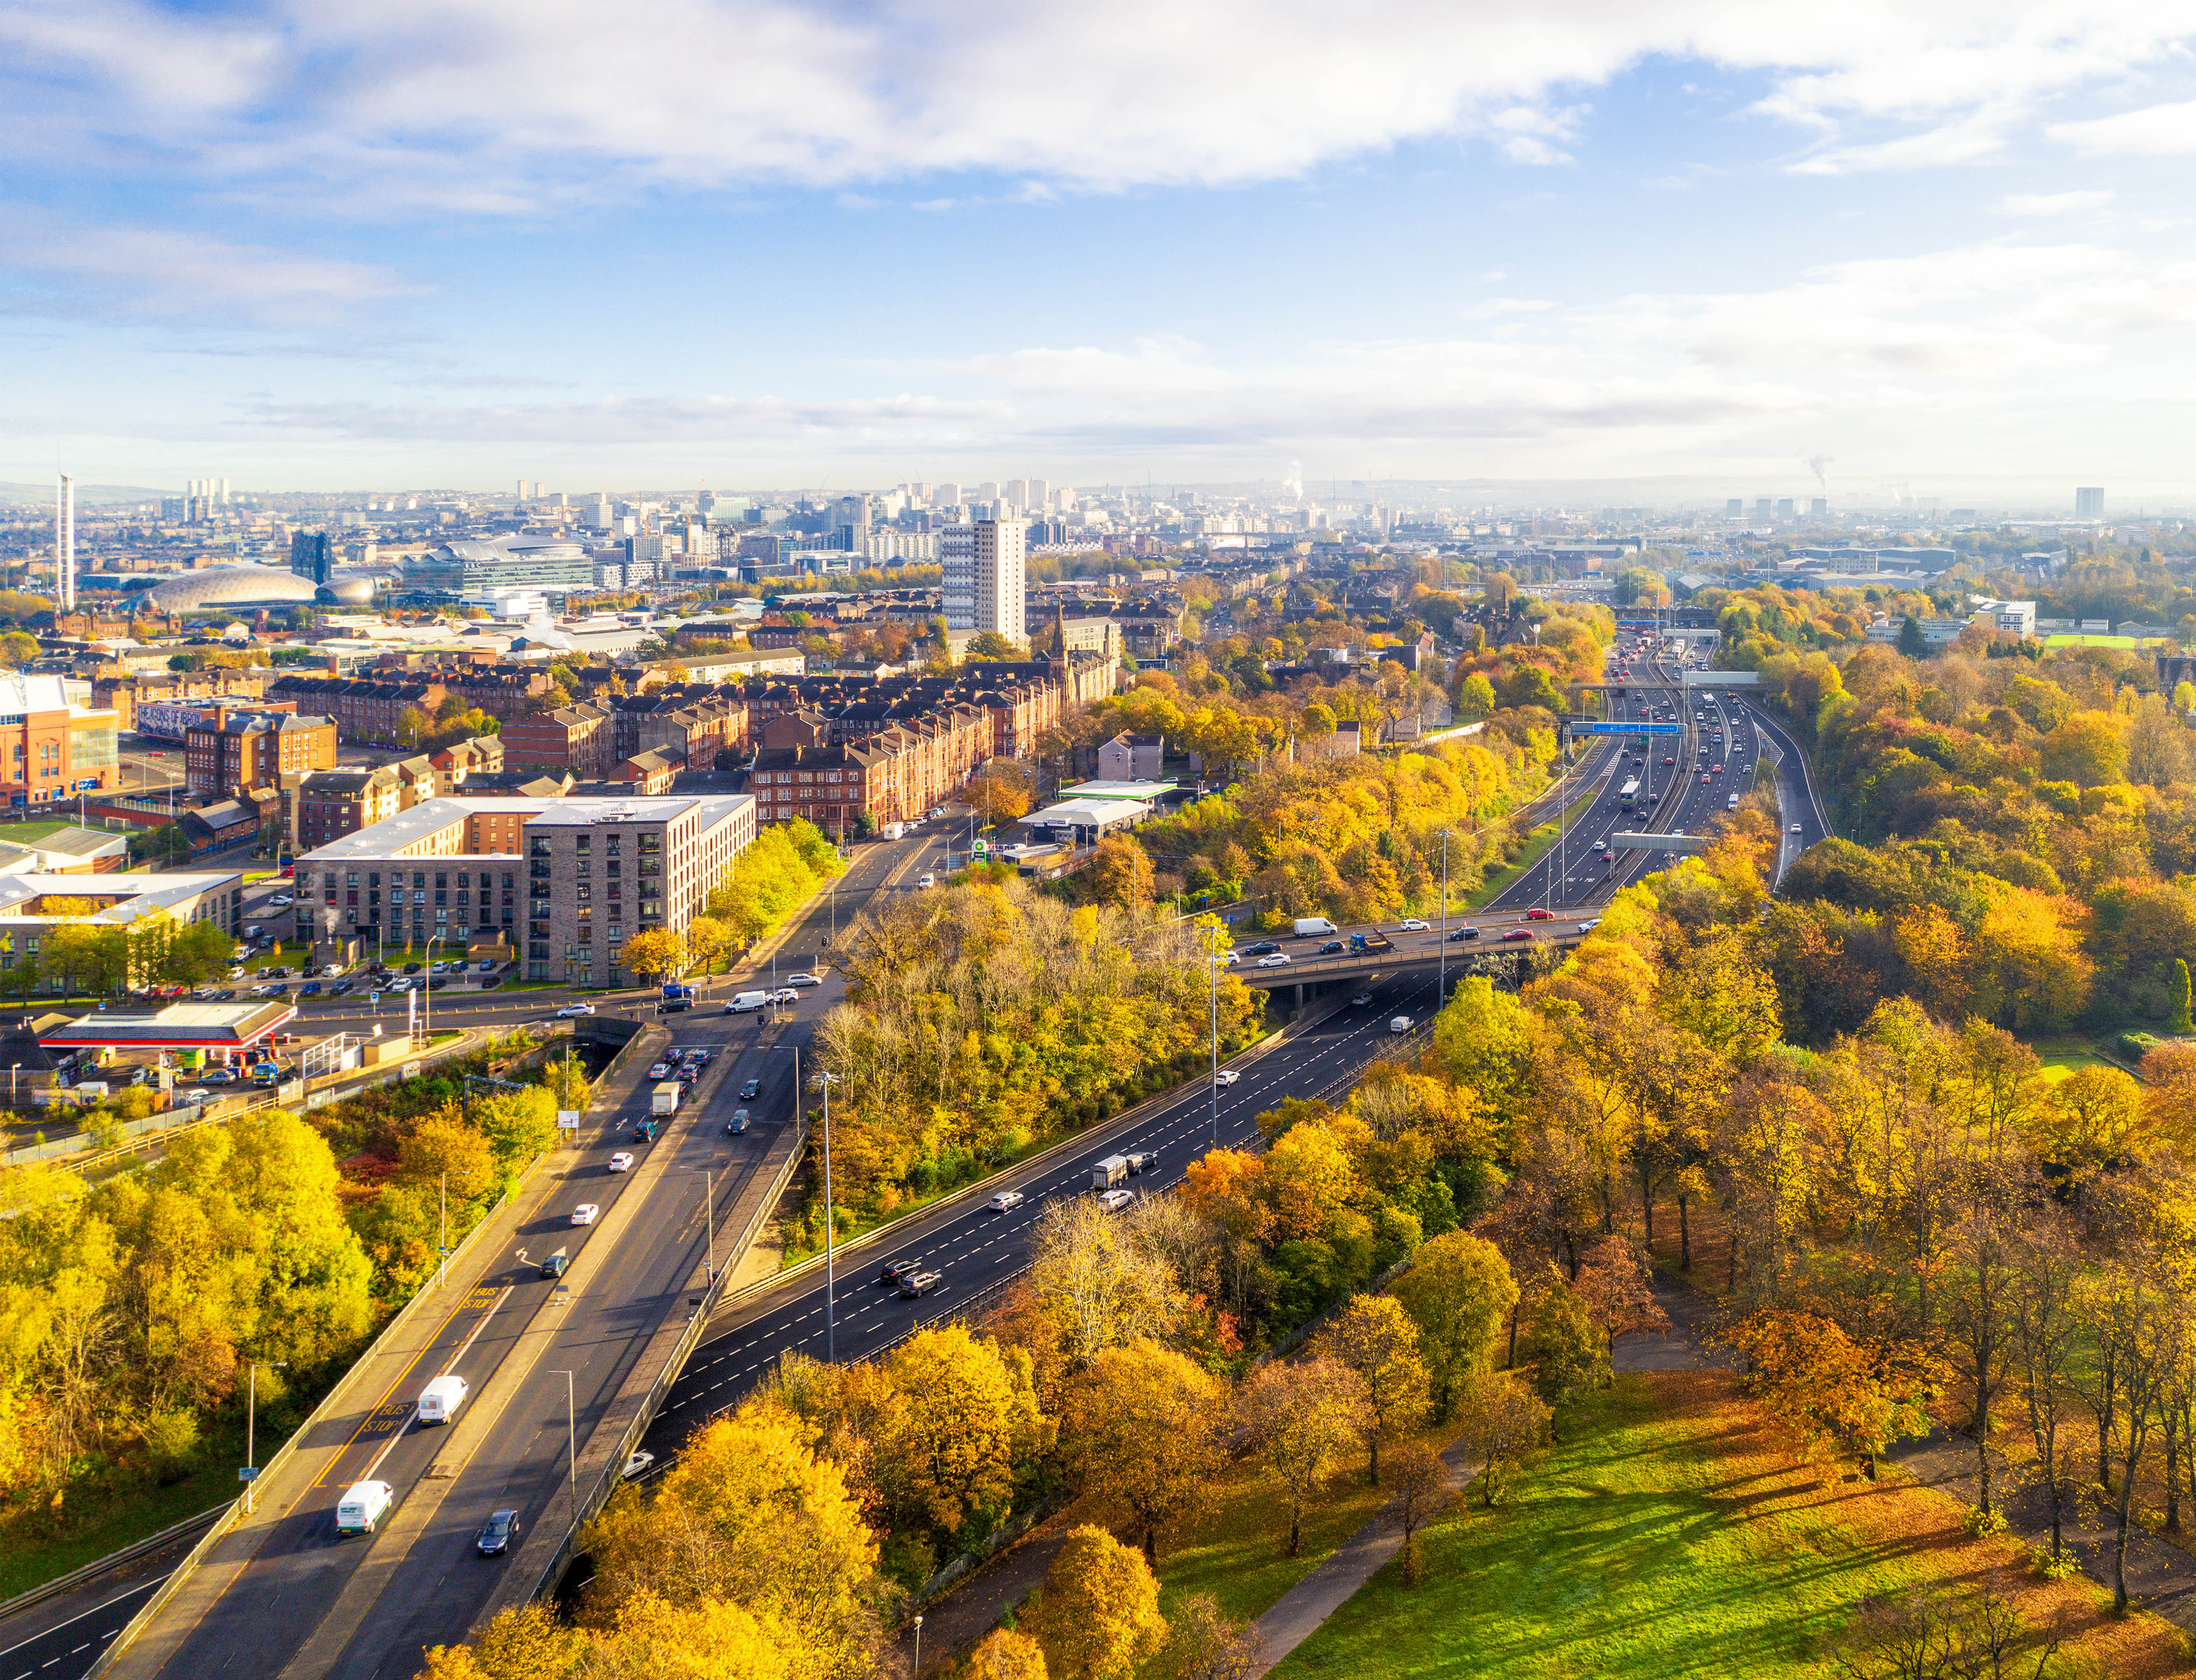 SGN's Environment Strategy front cover features Glasgow's Southside and central part of the city of Glasgow photographed from the air during autumn.